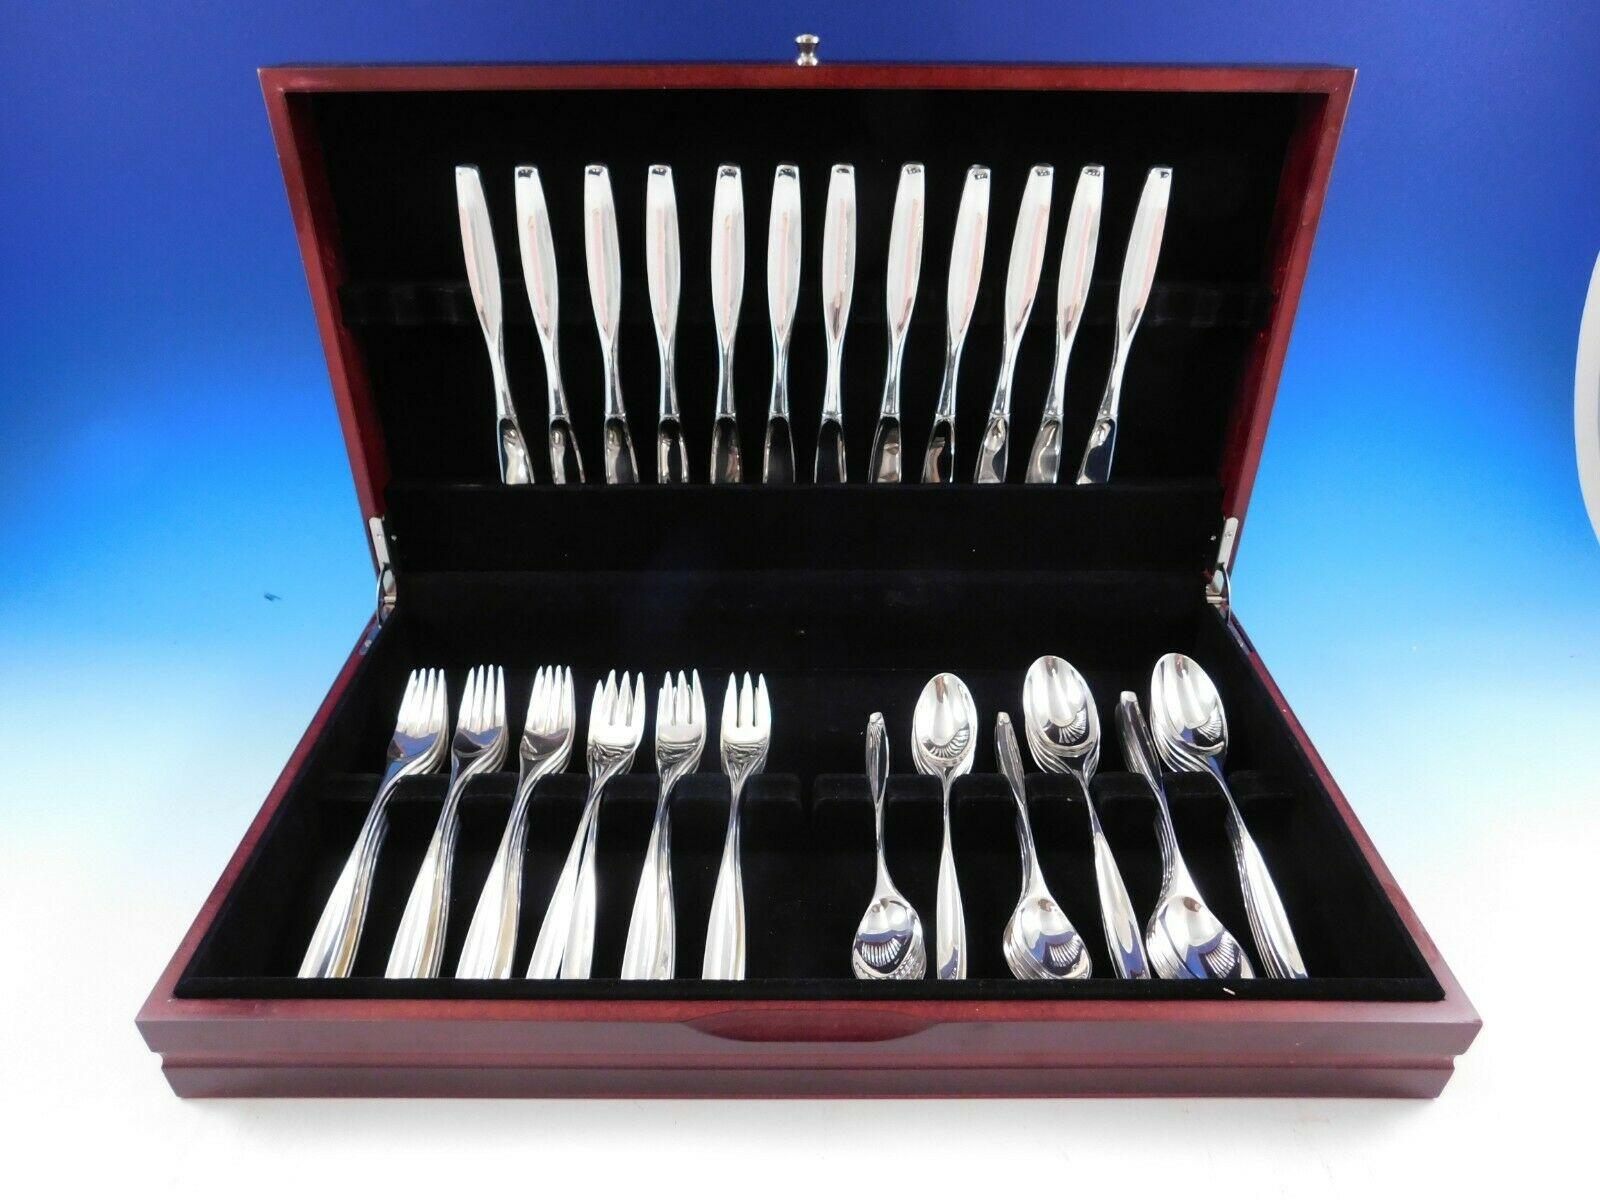 Beautifully simple Selene by Kirk & Son. Sterling Silver flatware set, 60 pieces. This set includes:

12 Knives, 8 3/4